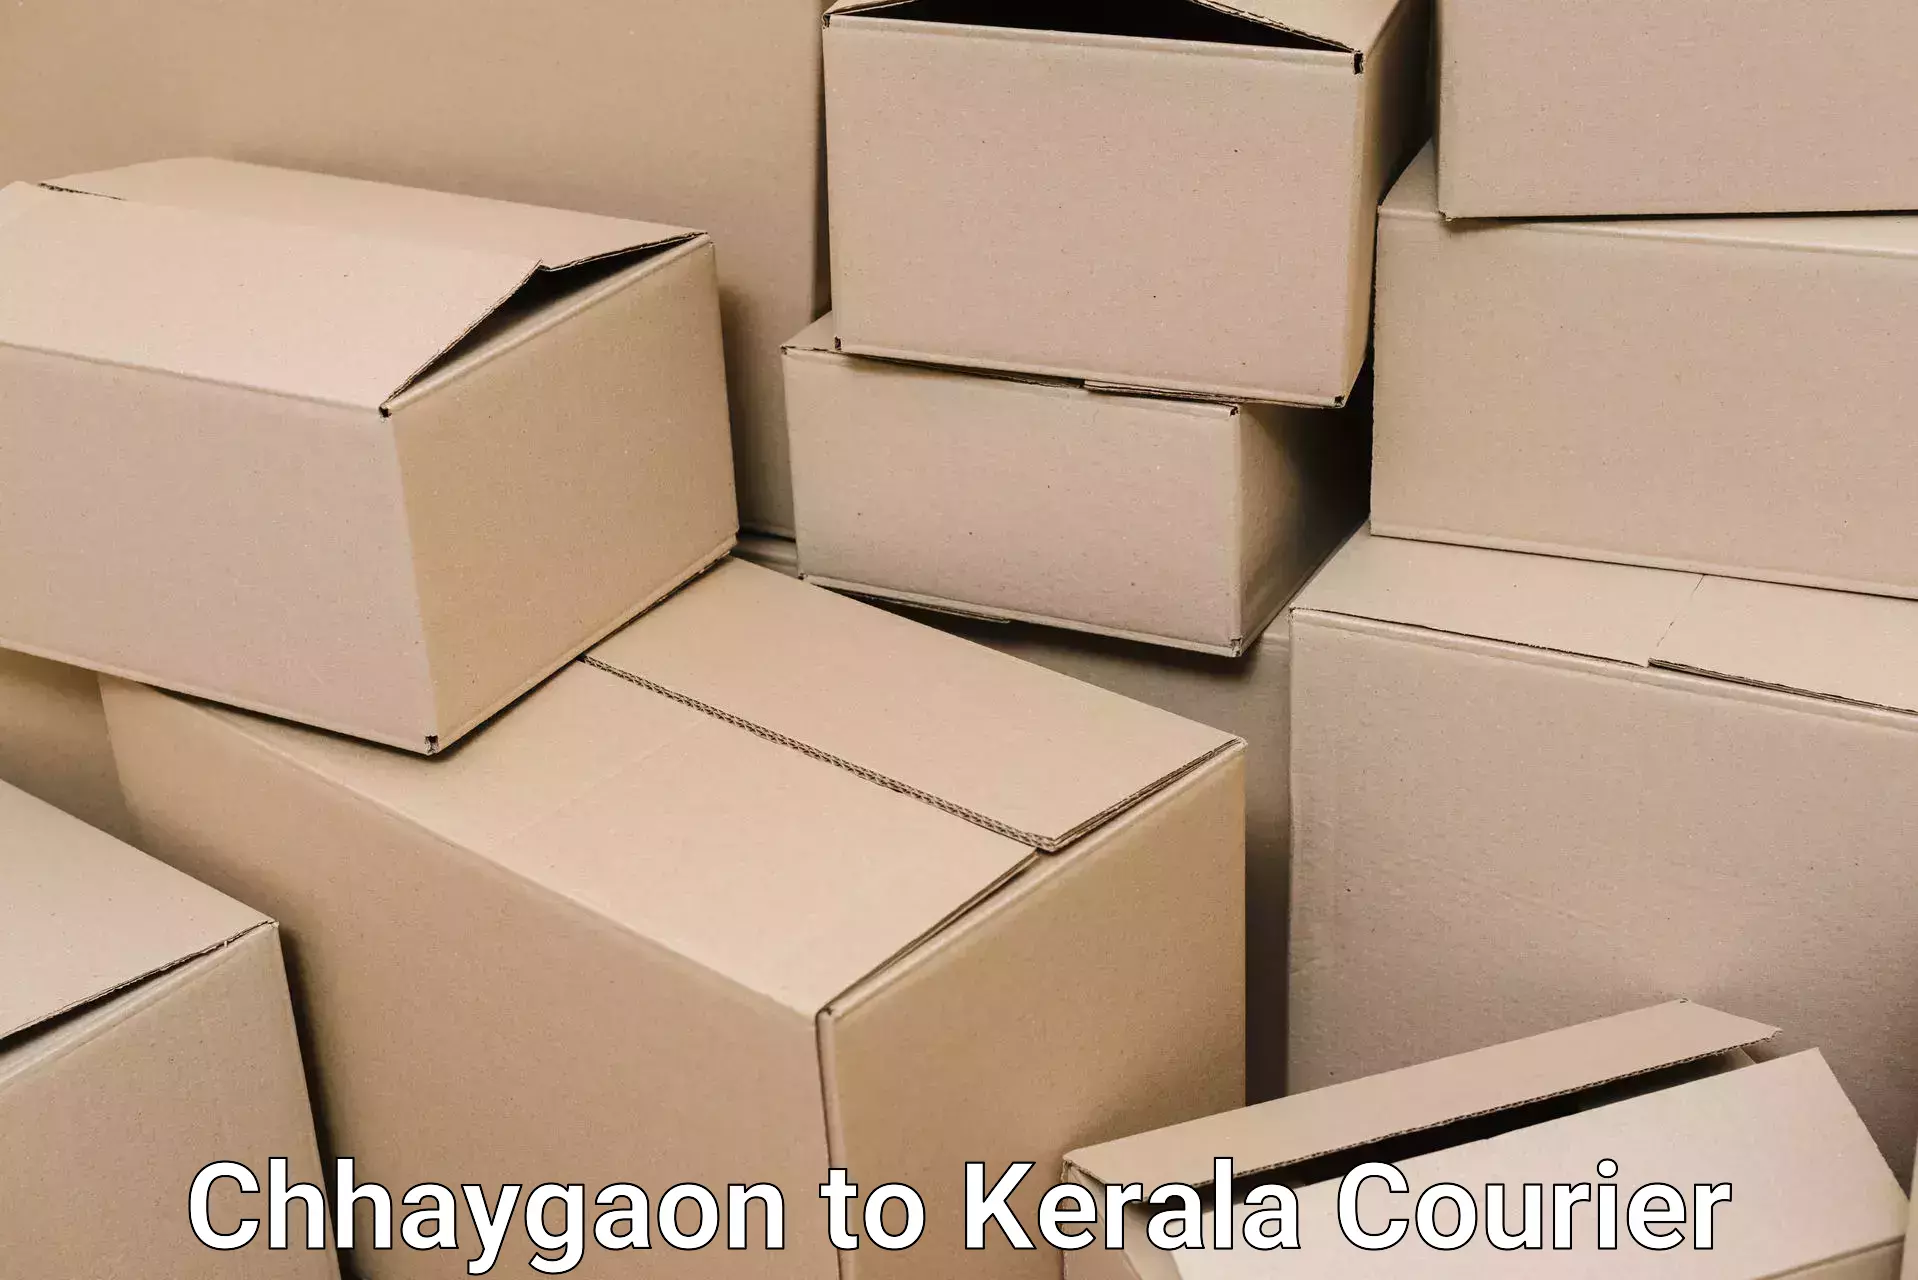 Trusted moving company Chhaygaon to Parippally